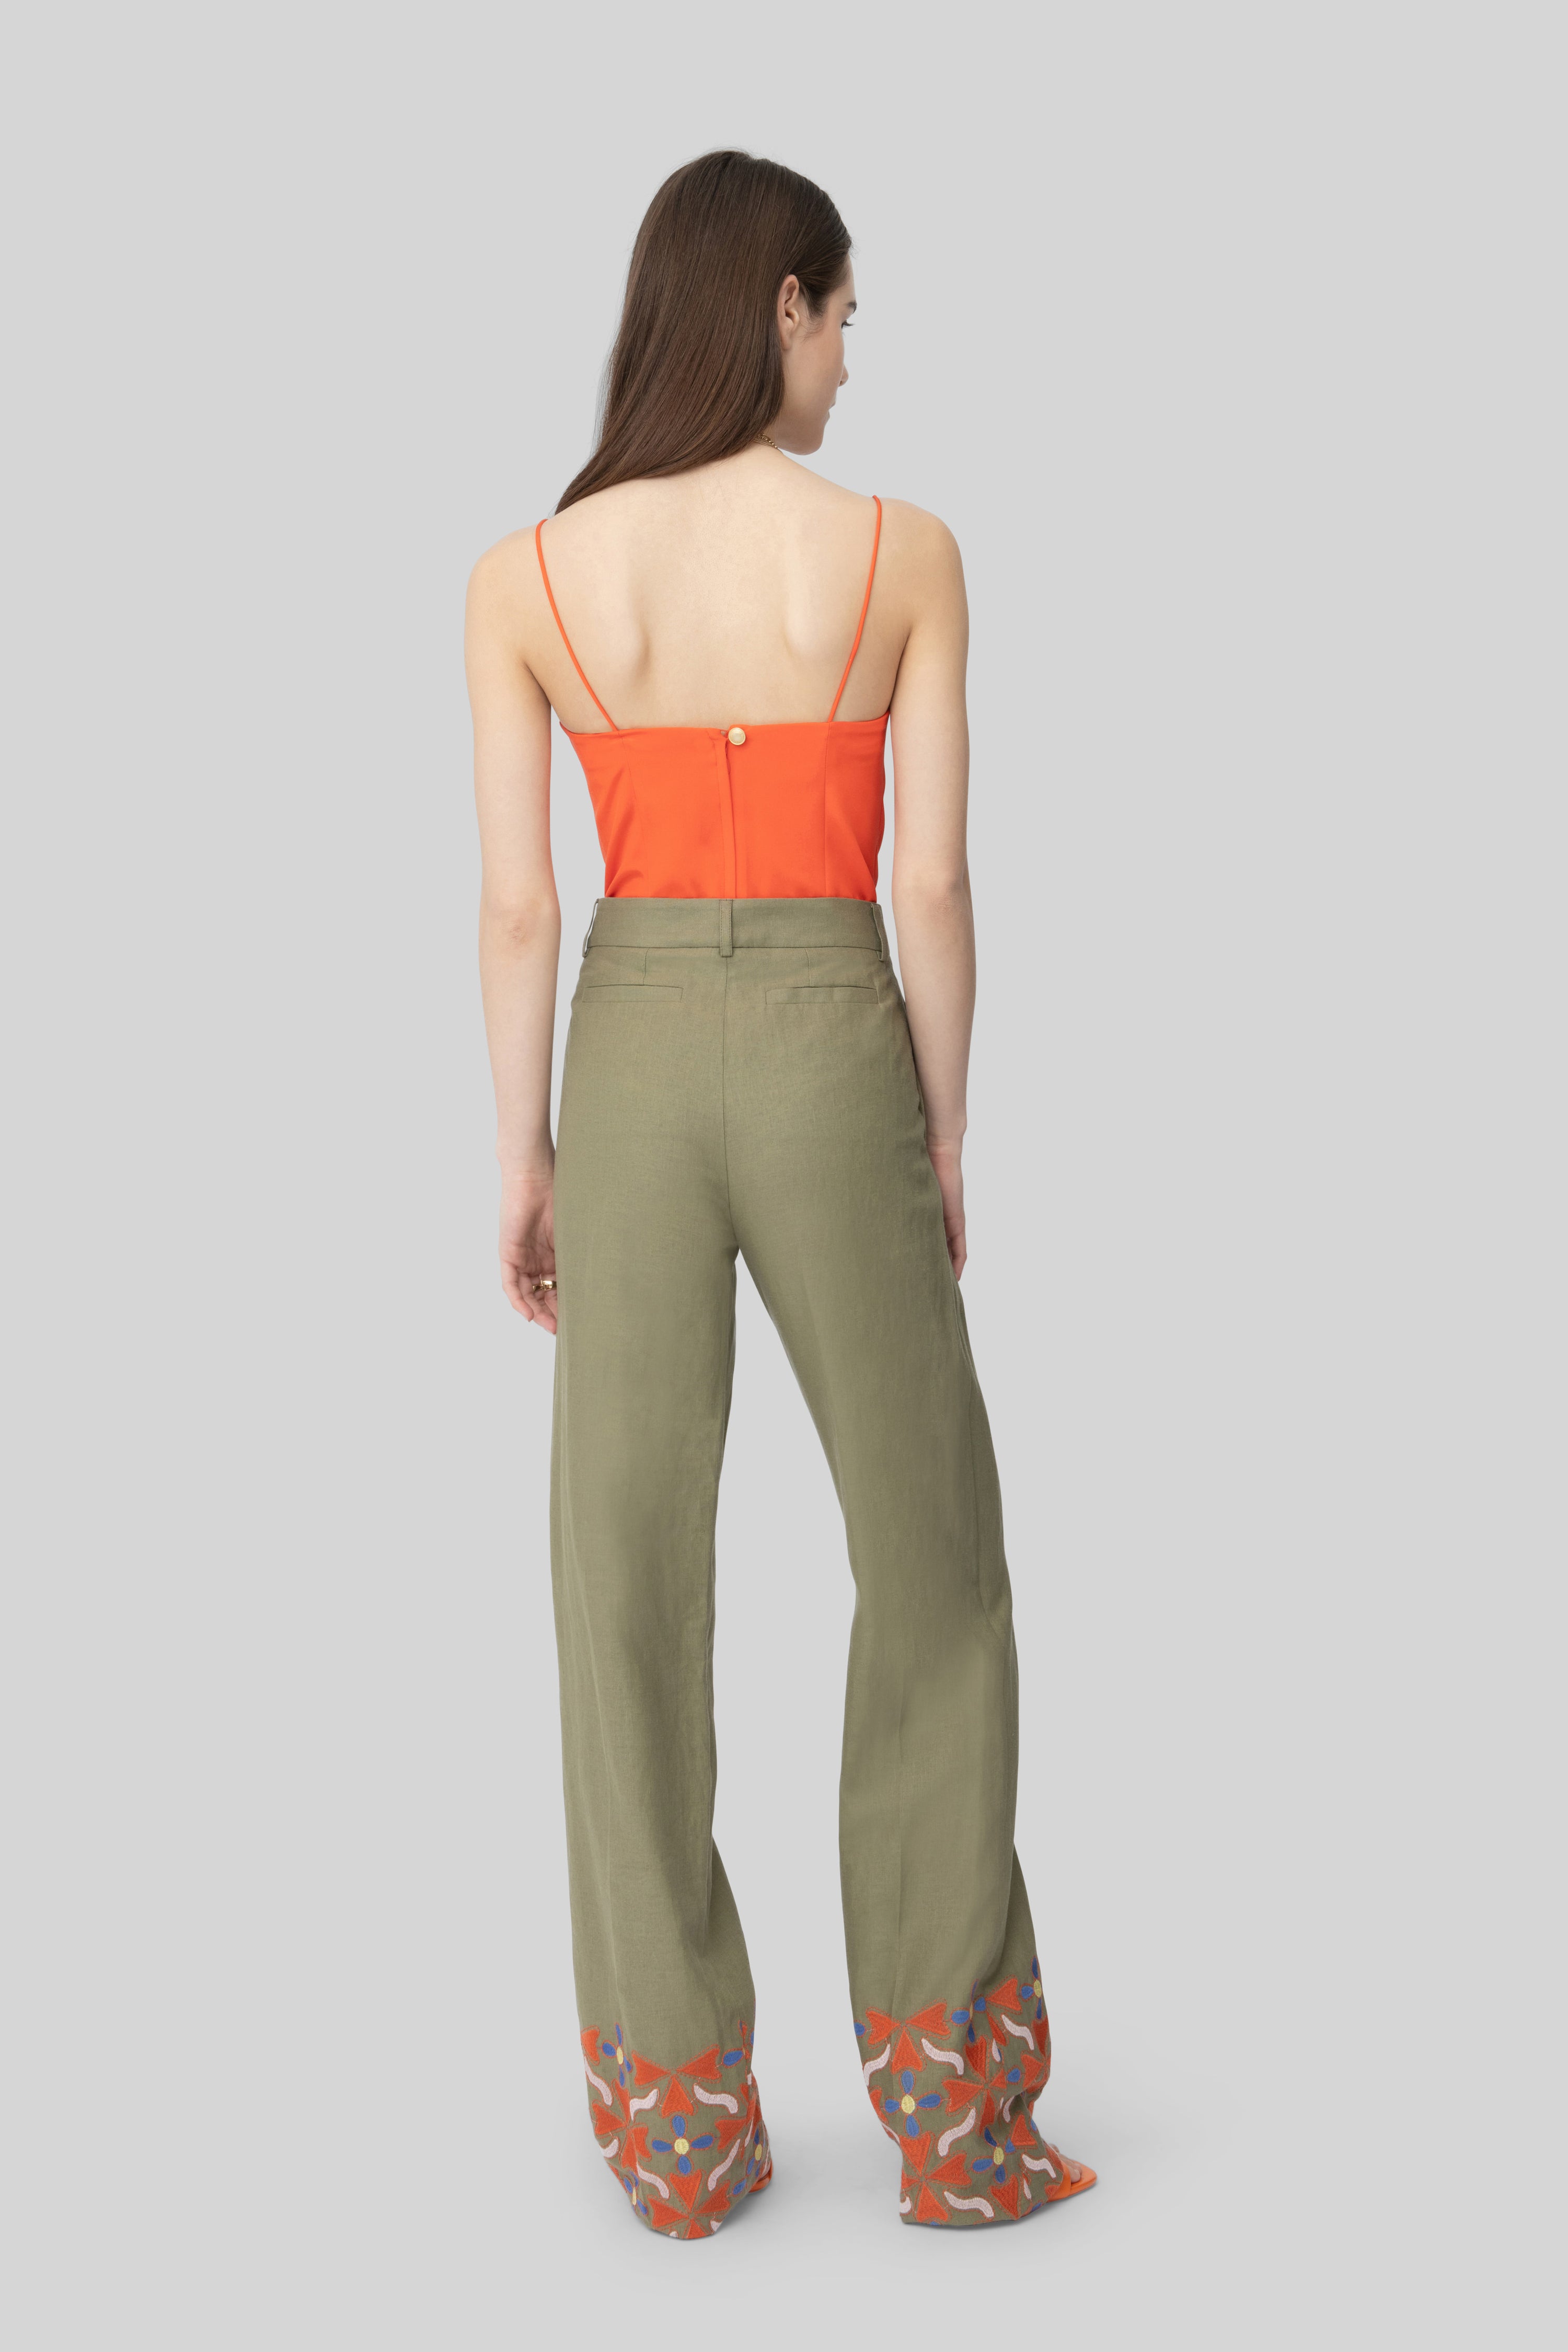 The Army Green & Orange Embroidered Linen Diane Pants